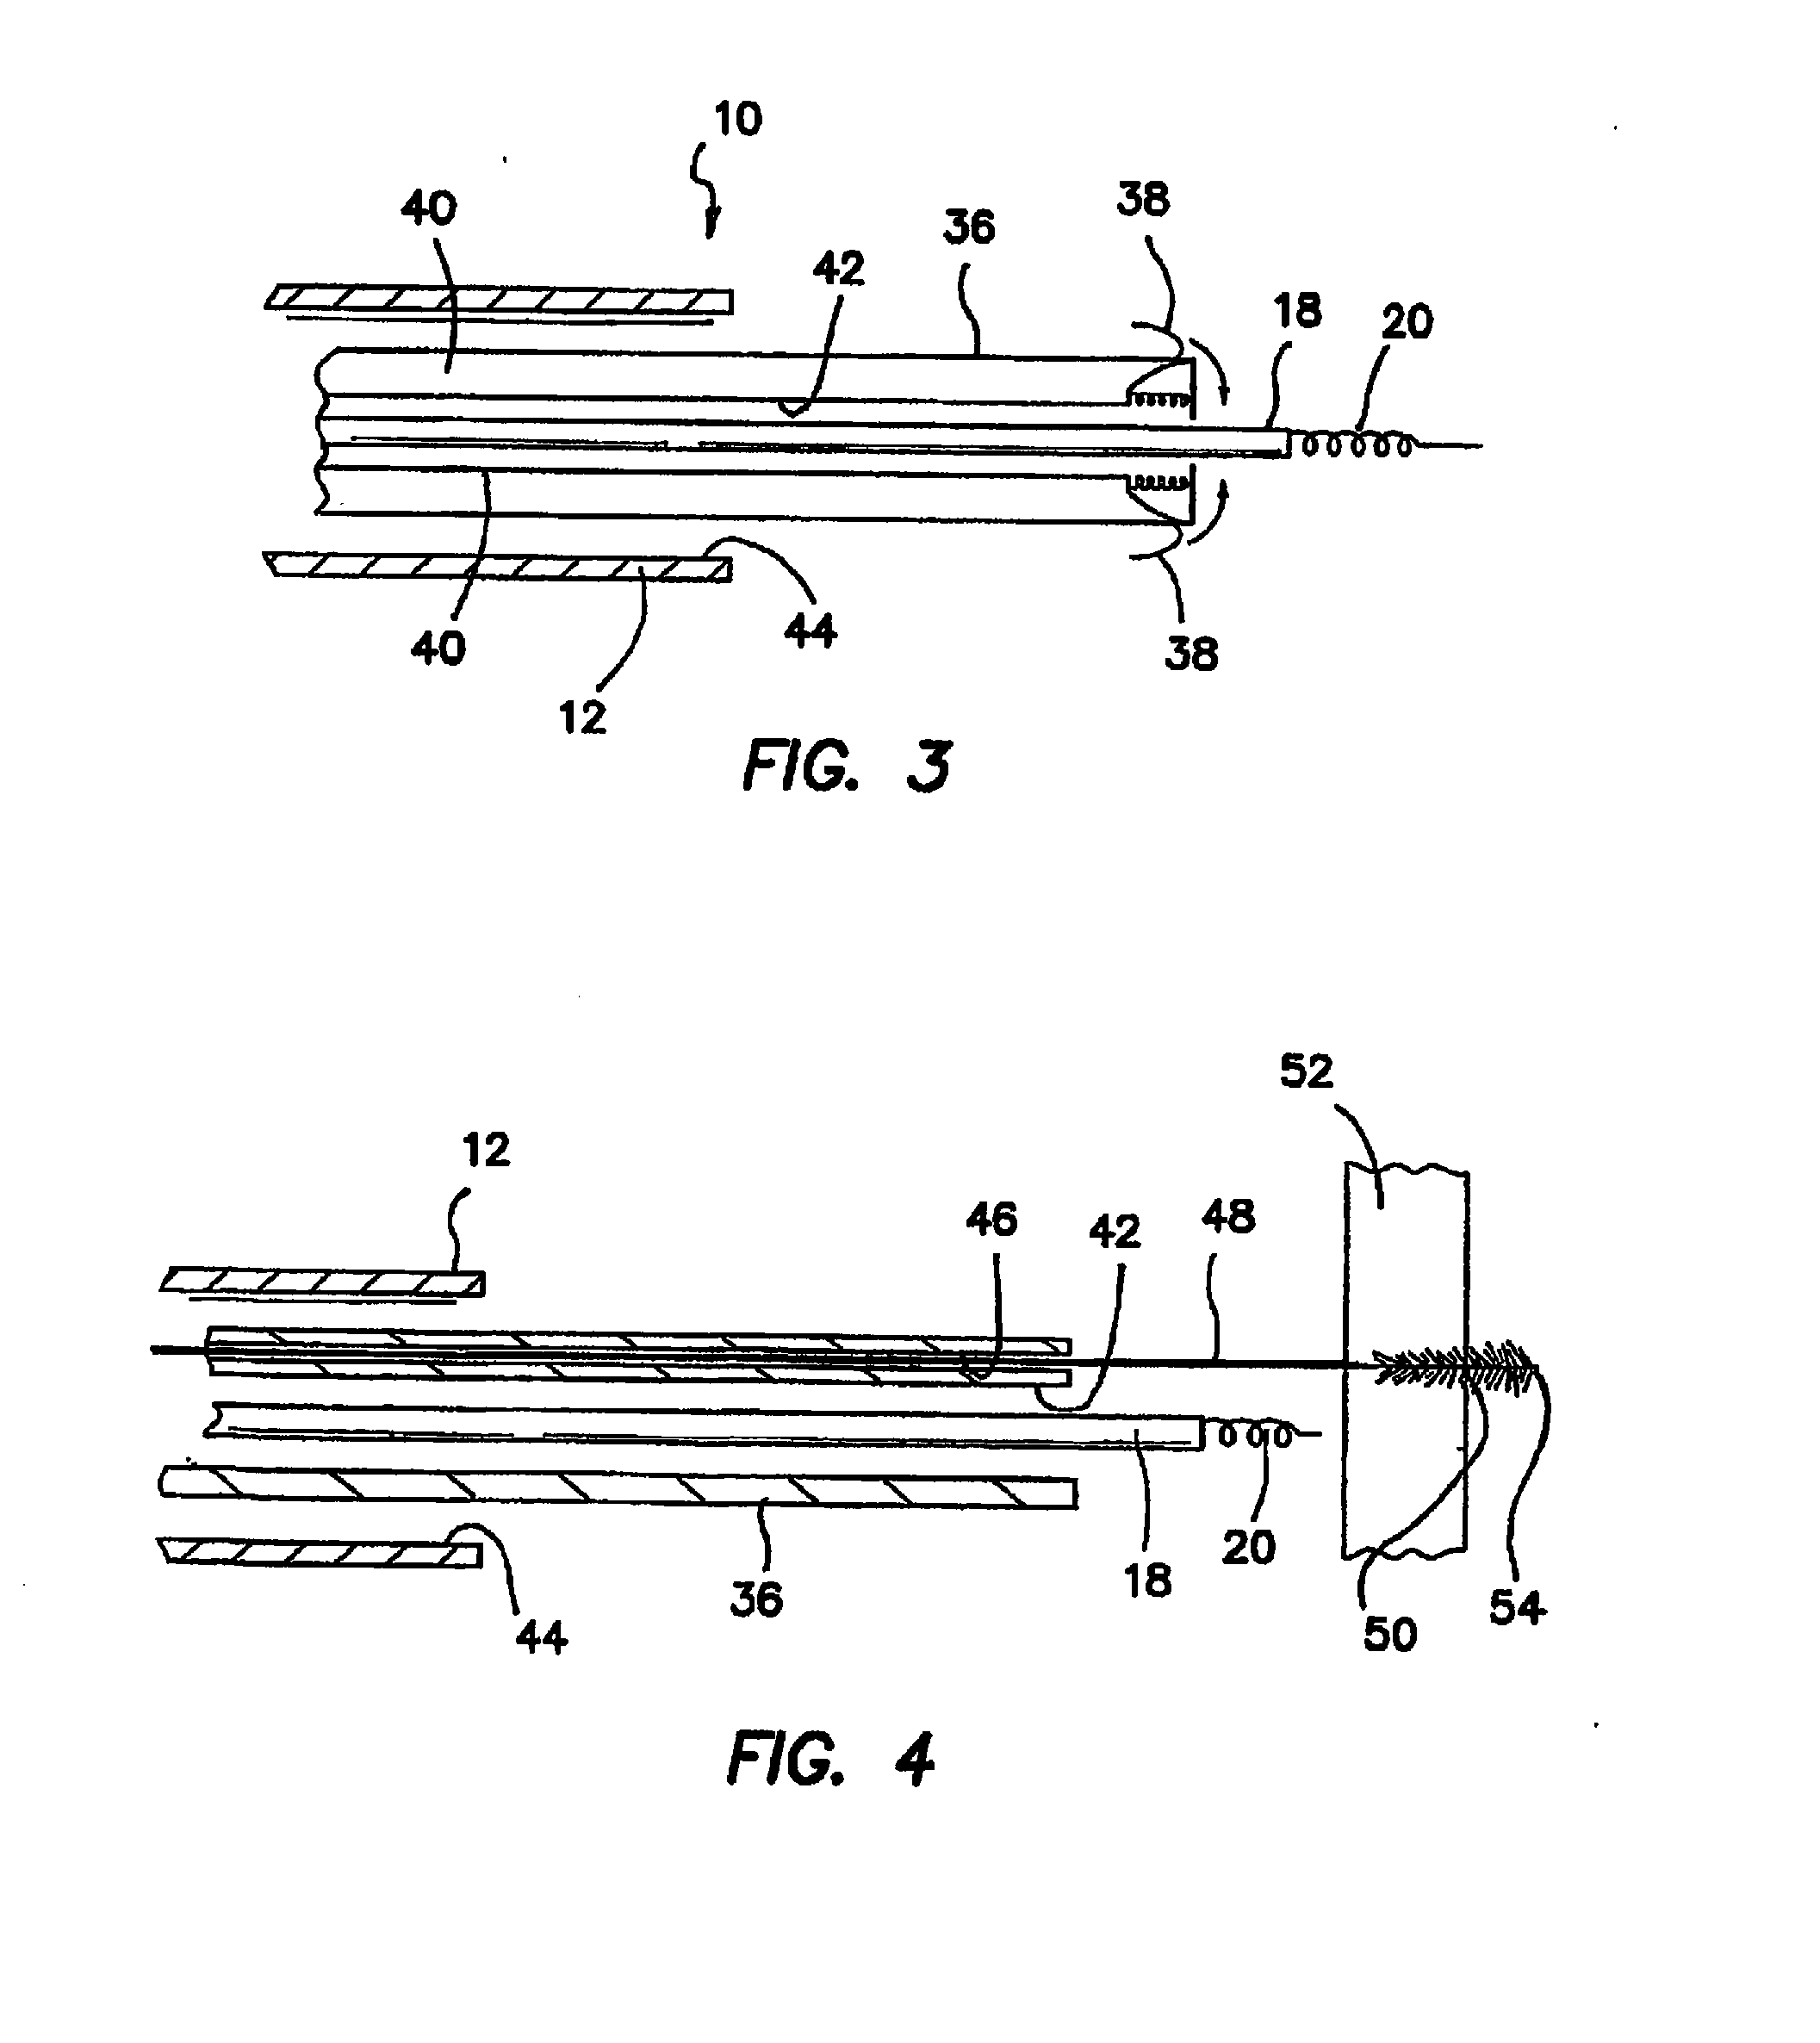 Method for accessing the coronary microcirculation and pericardial space